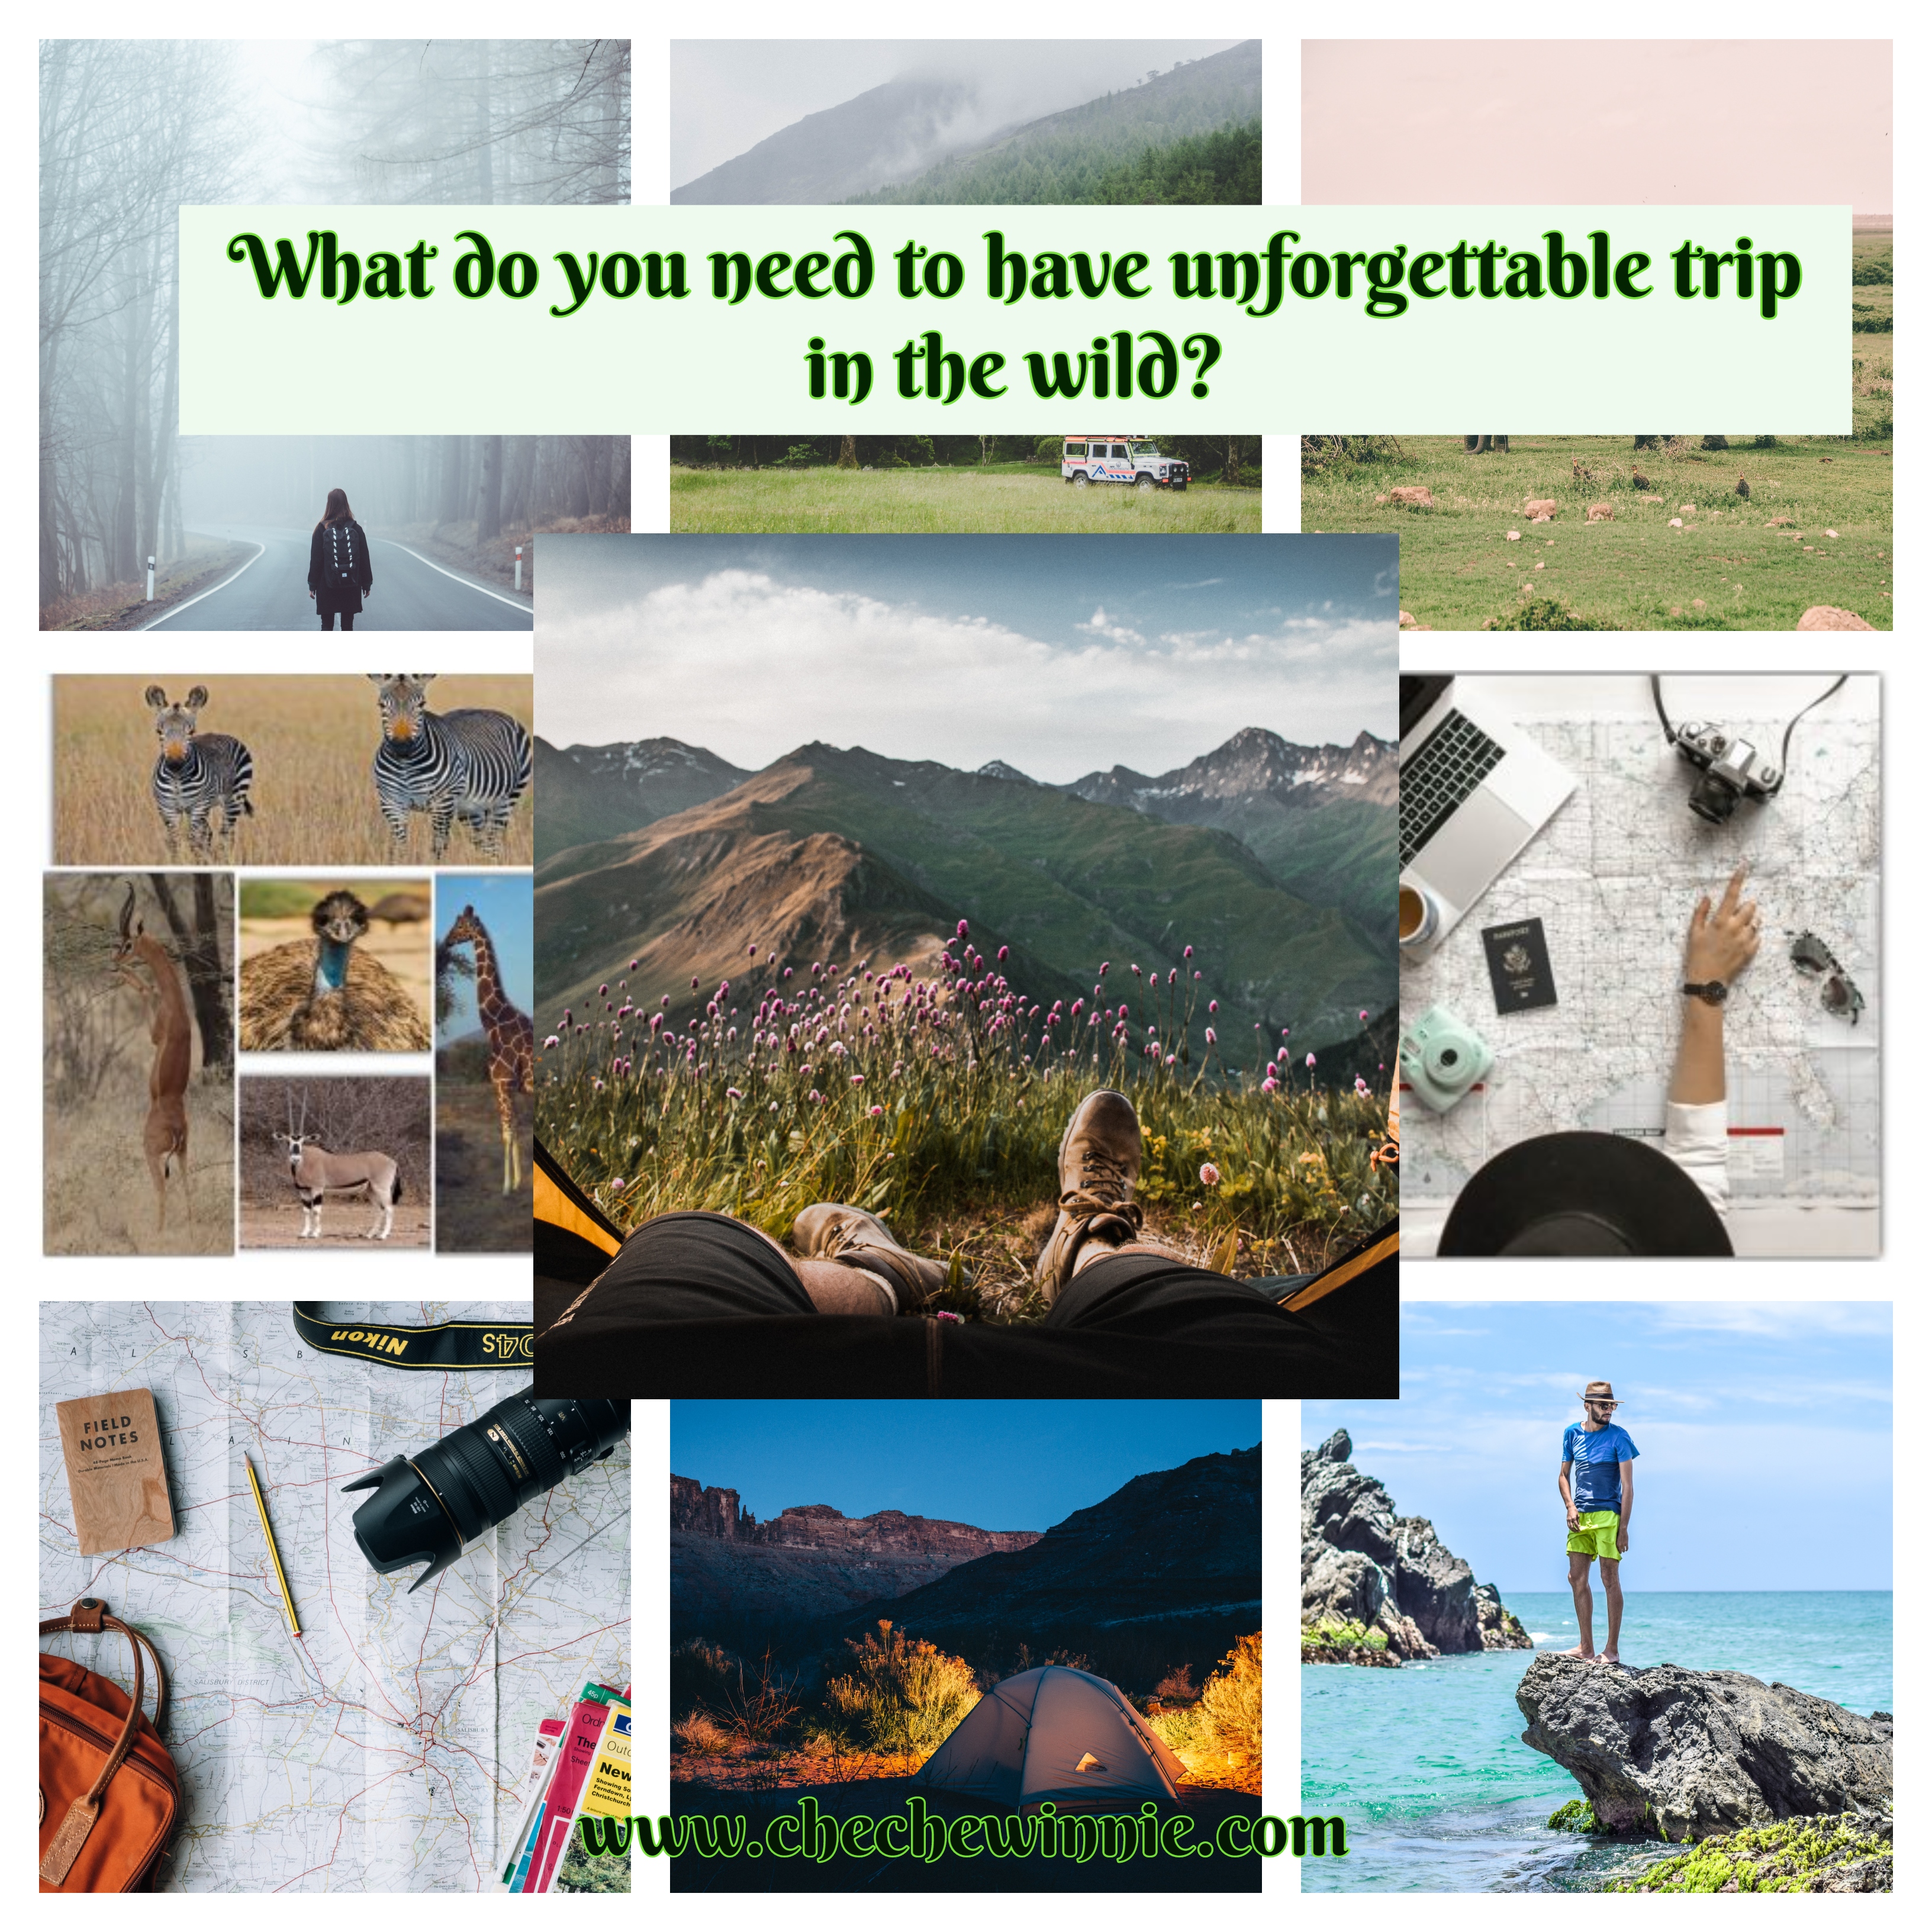 What do you need to have unforgettable trip in the wild?